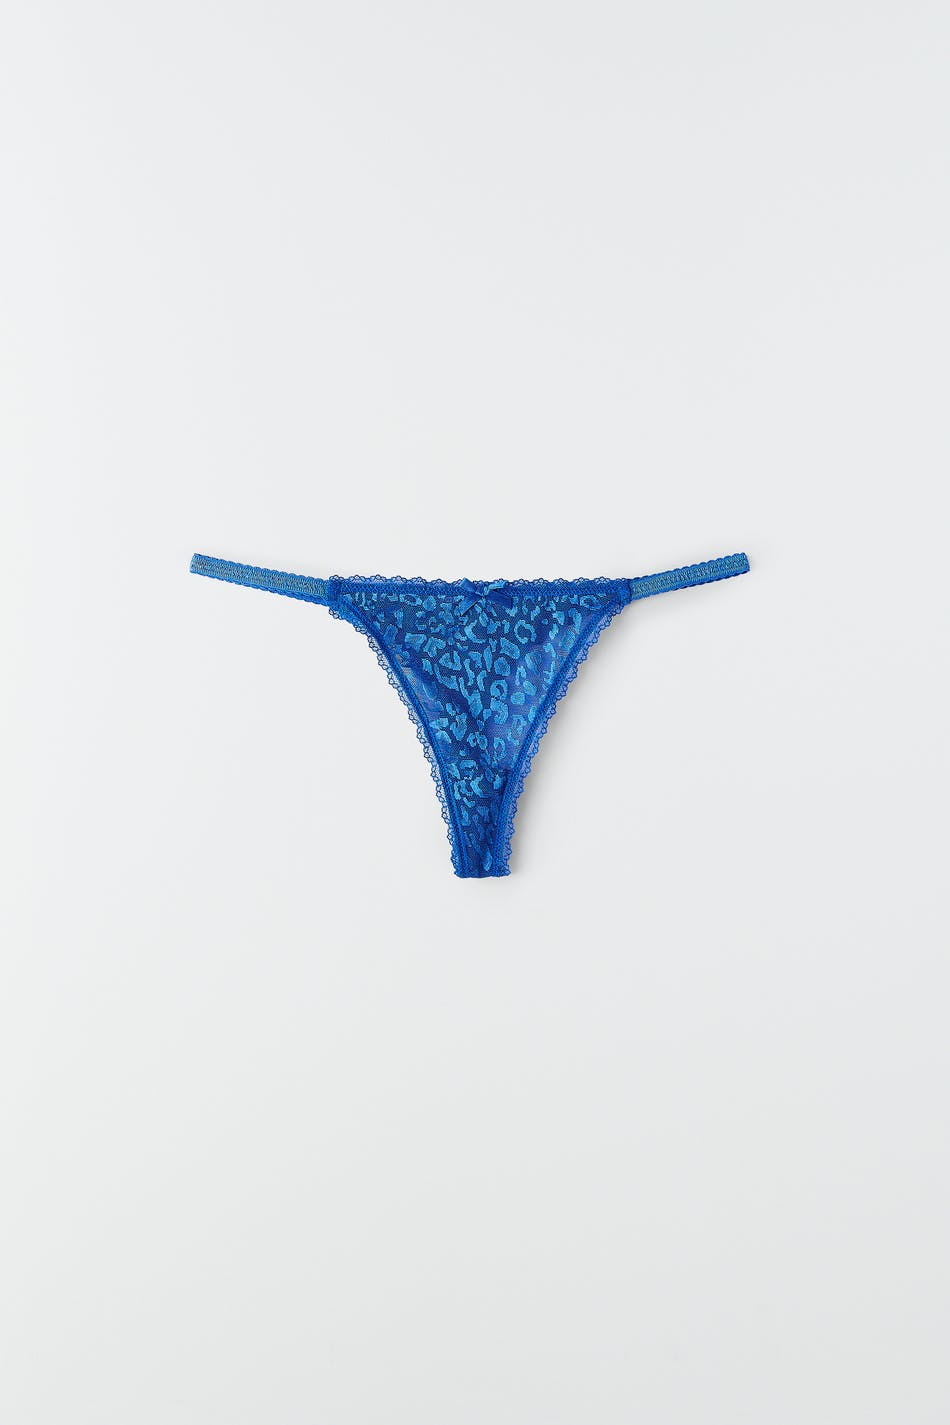 Buy Nelly Comfy Thong - Light Blue